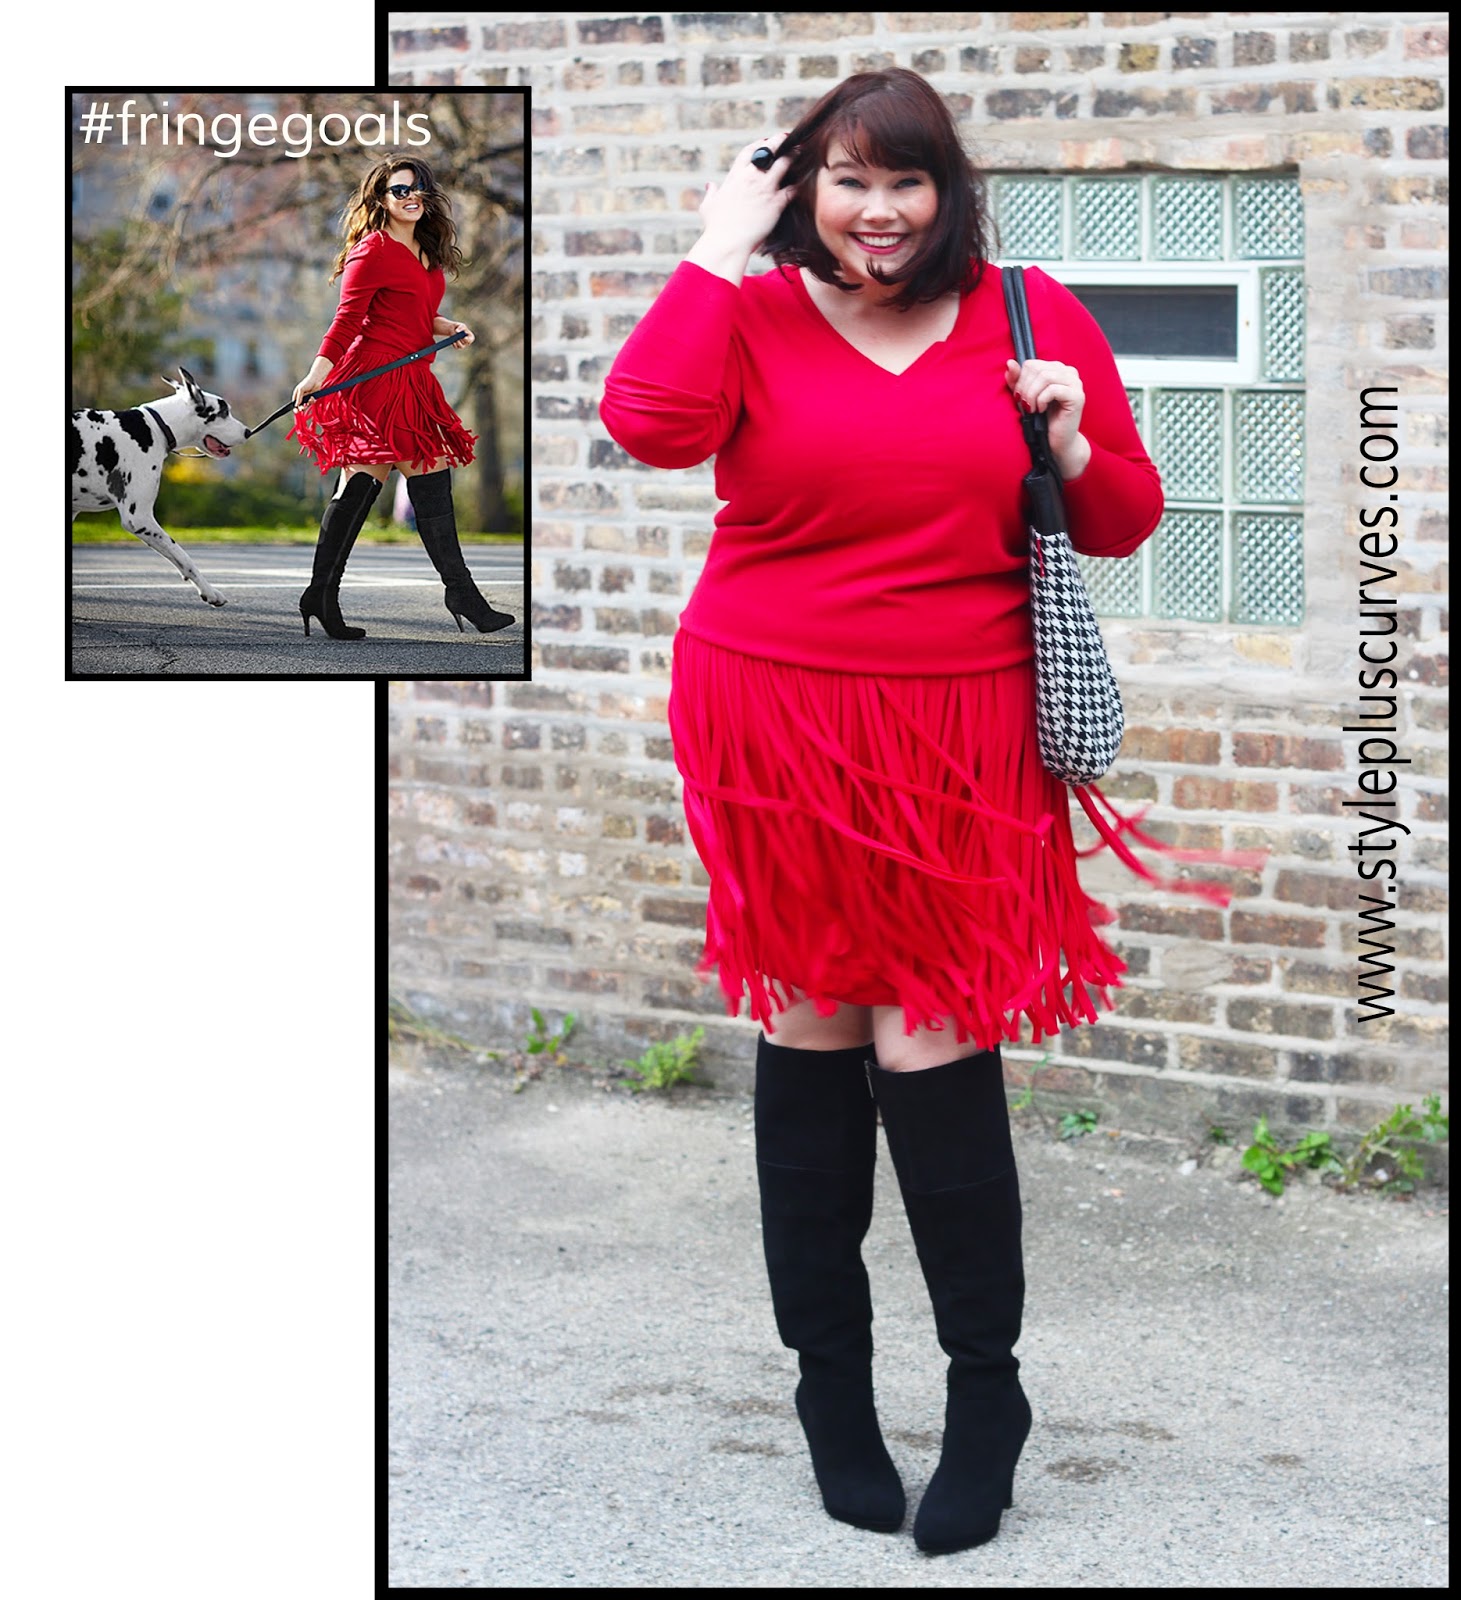 plus size red boots